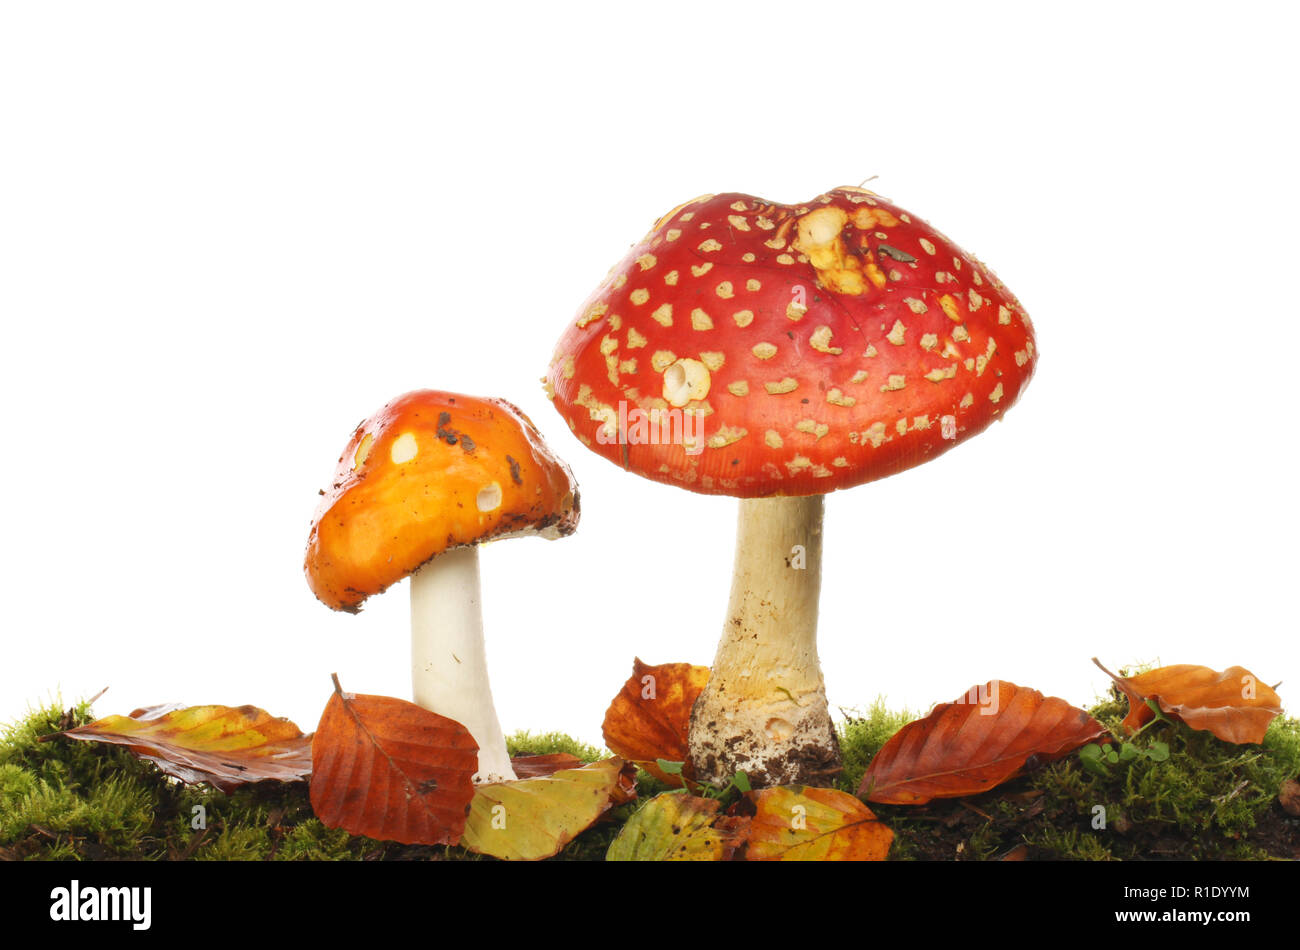 Fly agaric mushrooms growing in moss and leaf litter against a white background Stock Photo